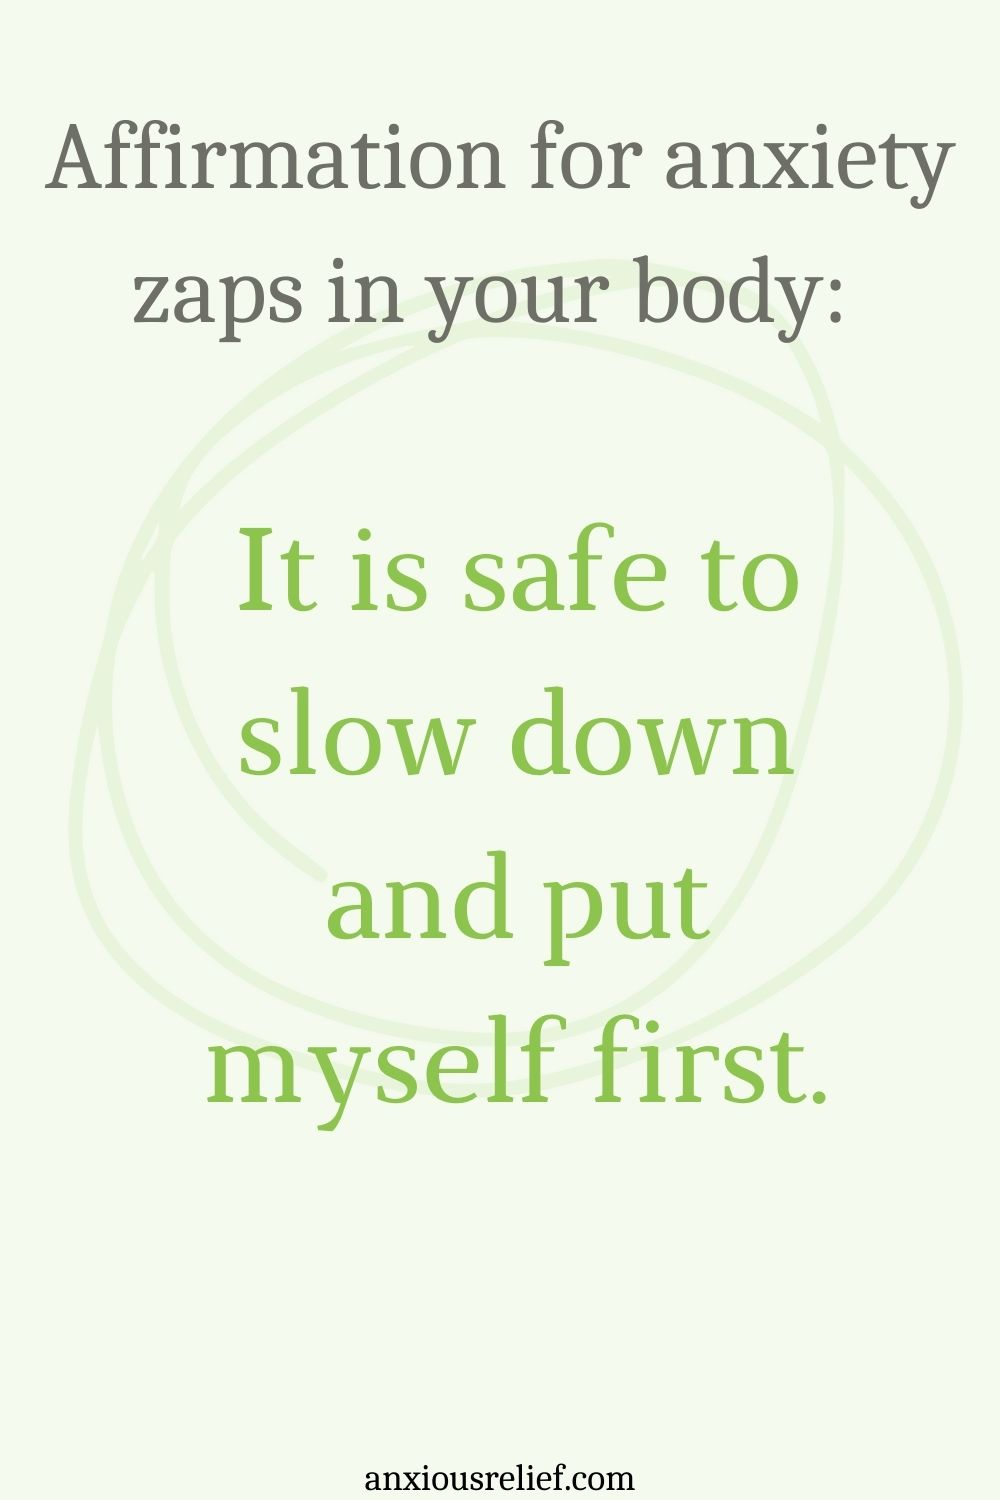 Affirmation for anxiety zaps in your body: It is safe to slow down and put myself first.